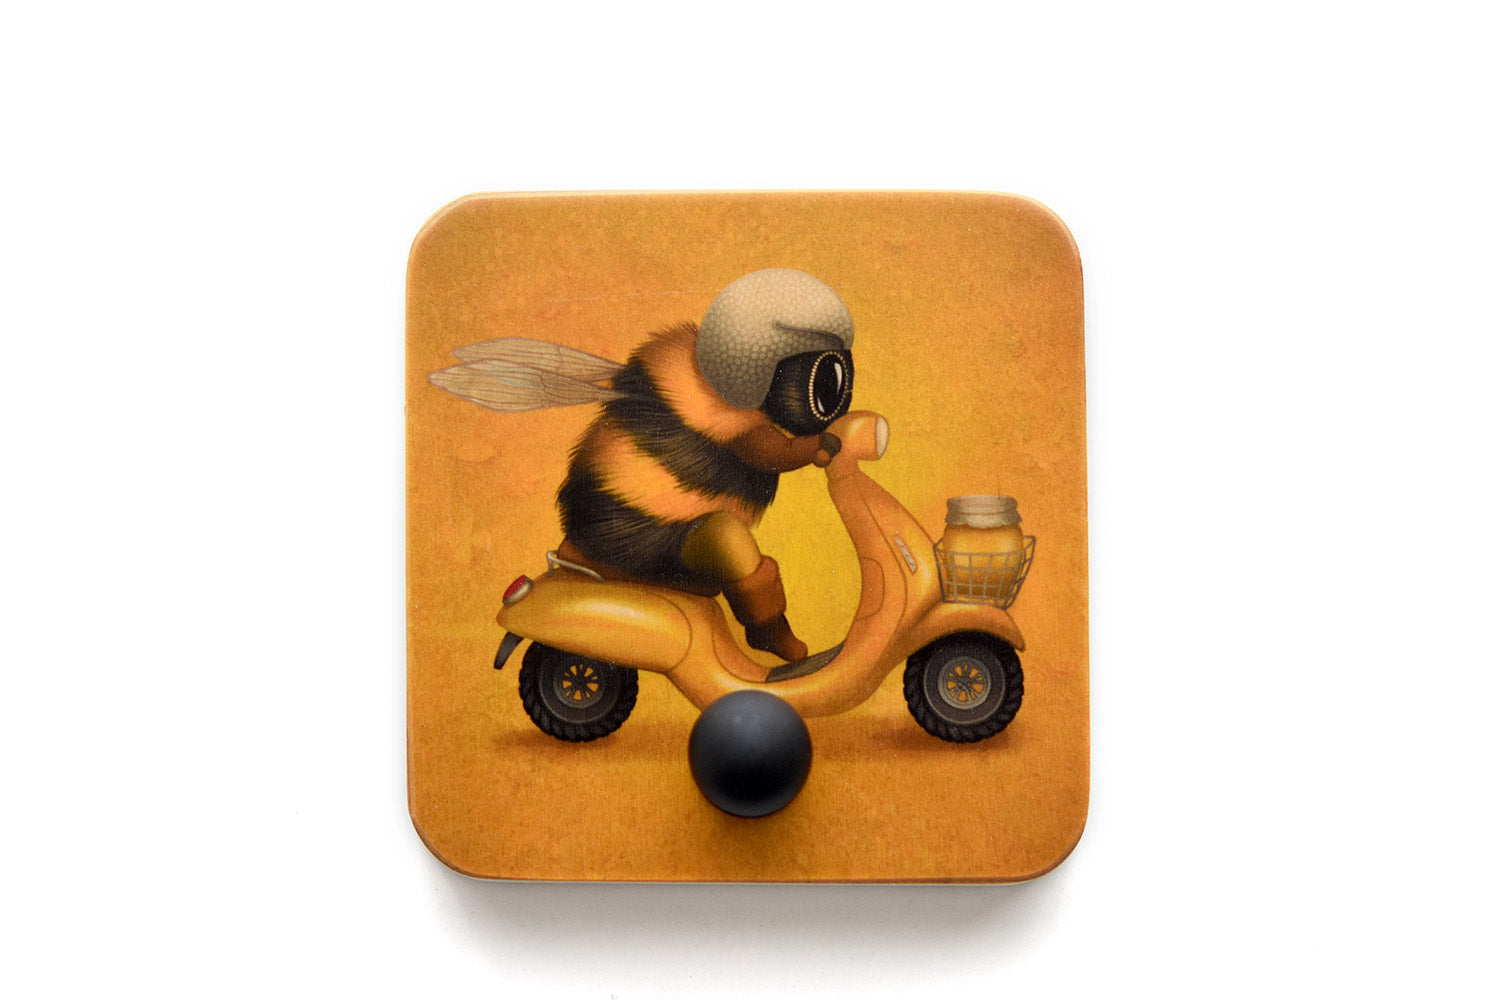 Wall hanger "The busy bee has no time for sorrow" (Bumblebee)